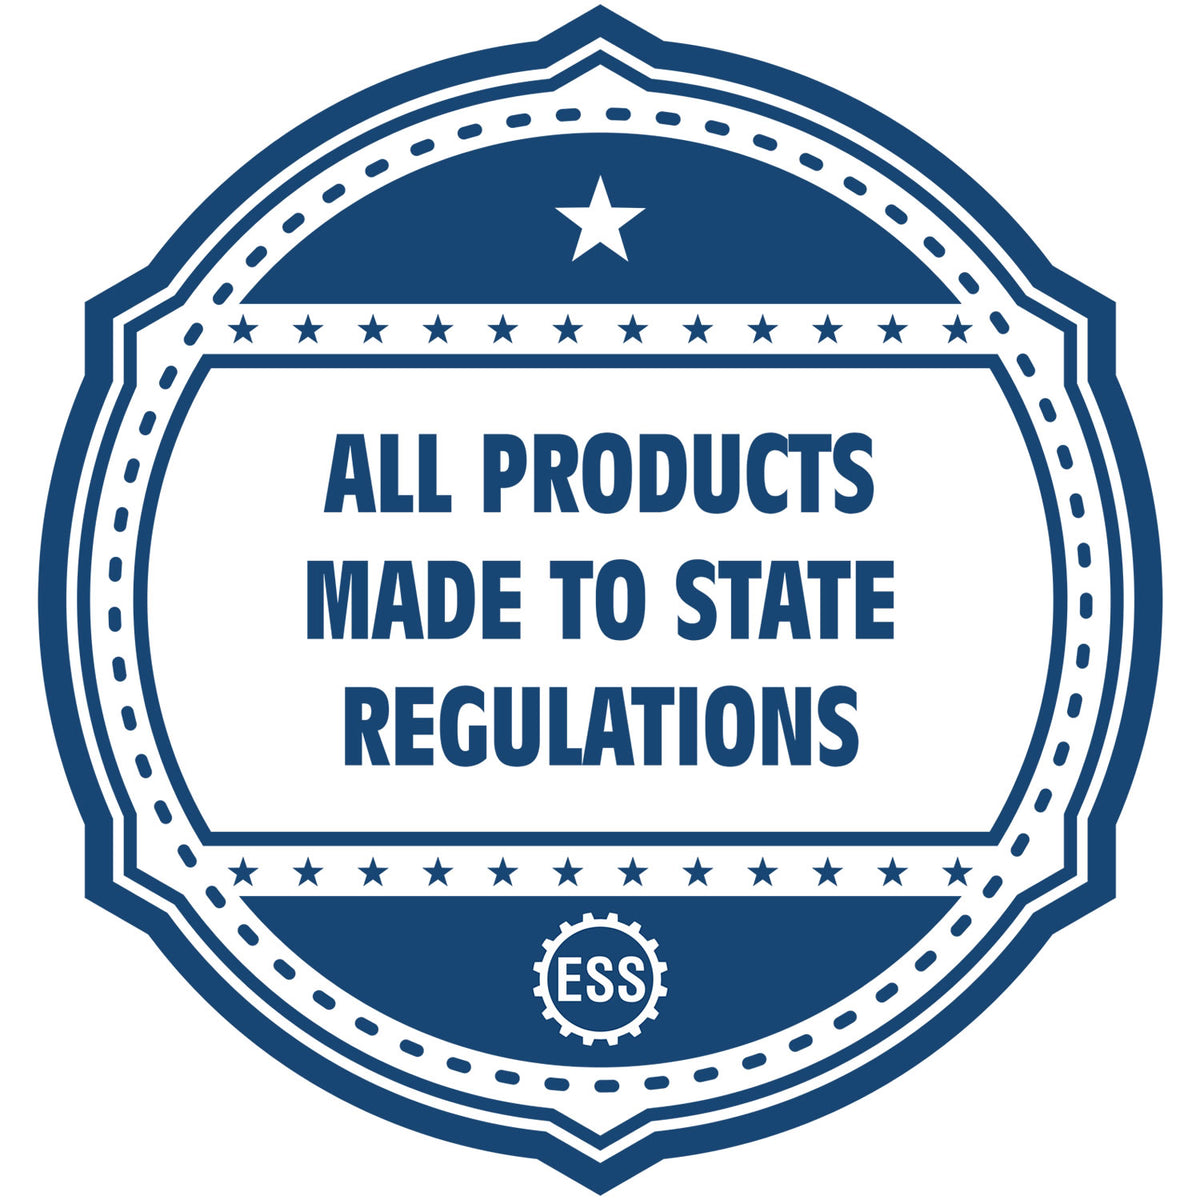 A blue icon or badge for the Hybrid Minnesota Architect Seal showing that this product is made in compliance with state regulations.